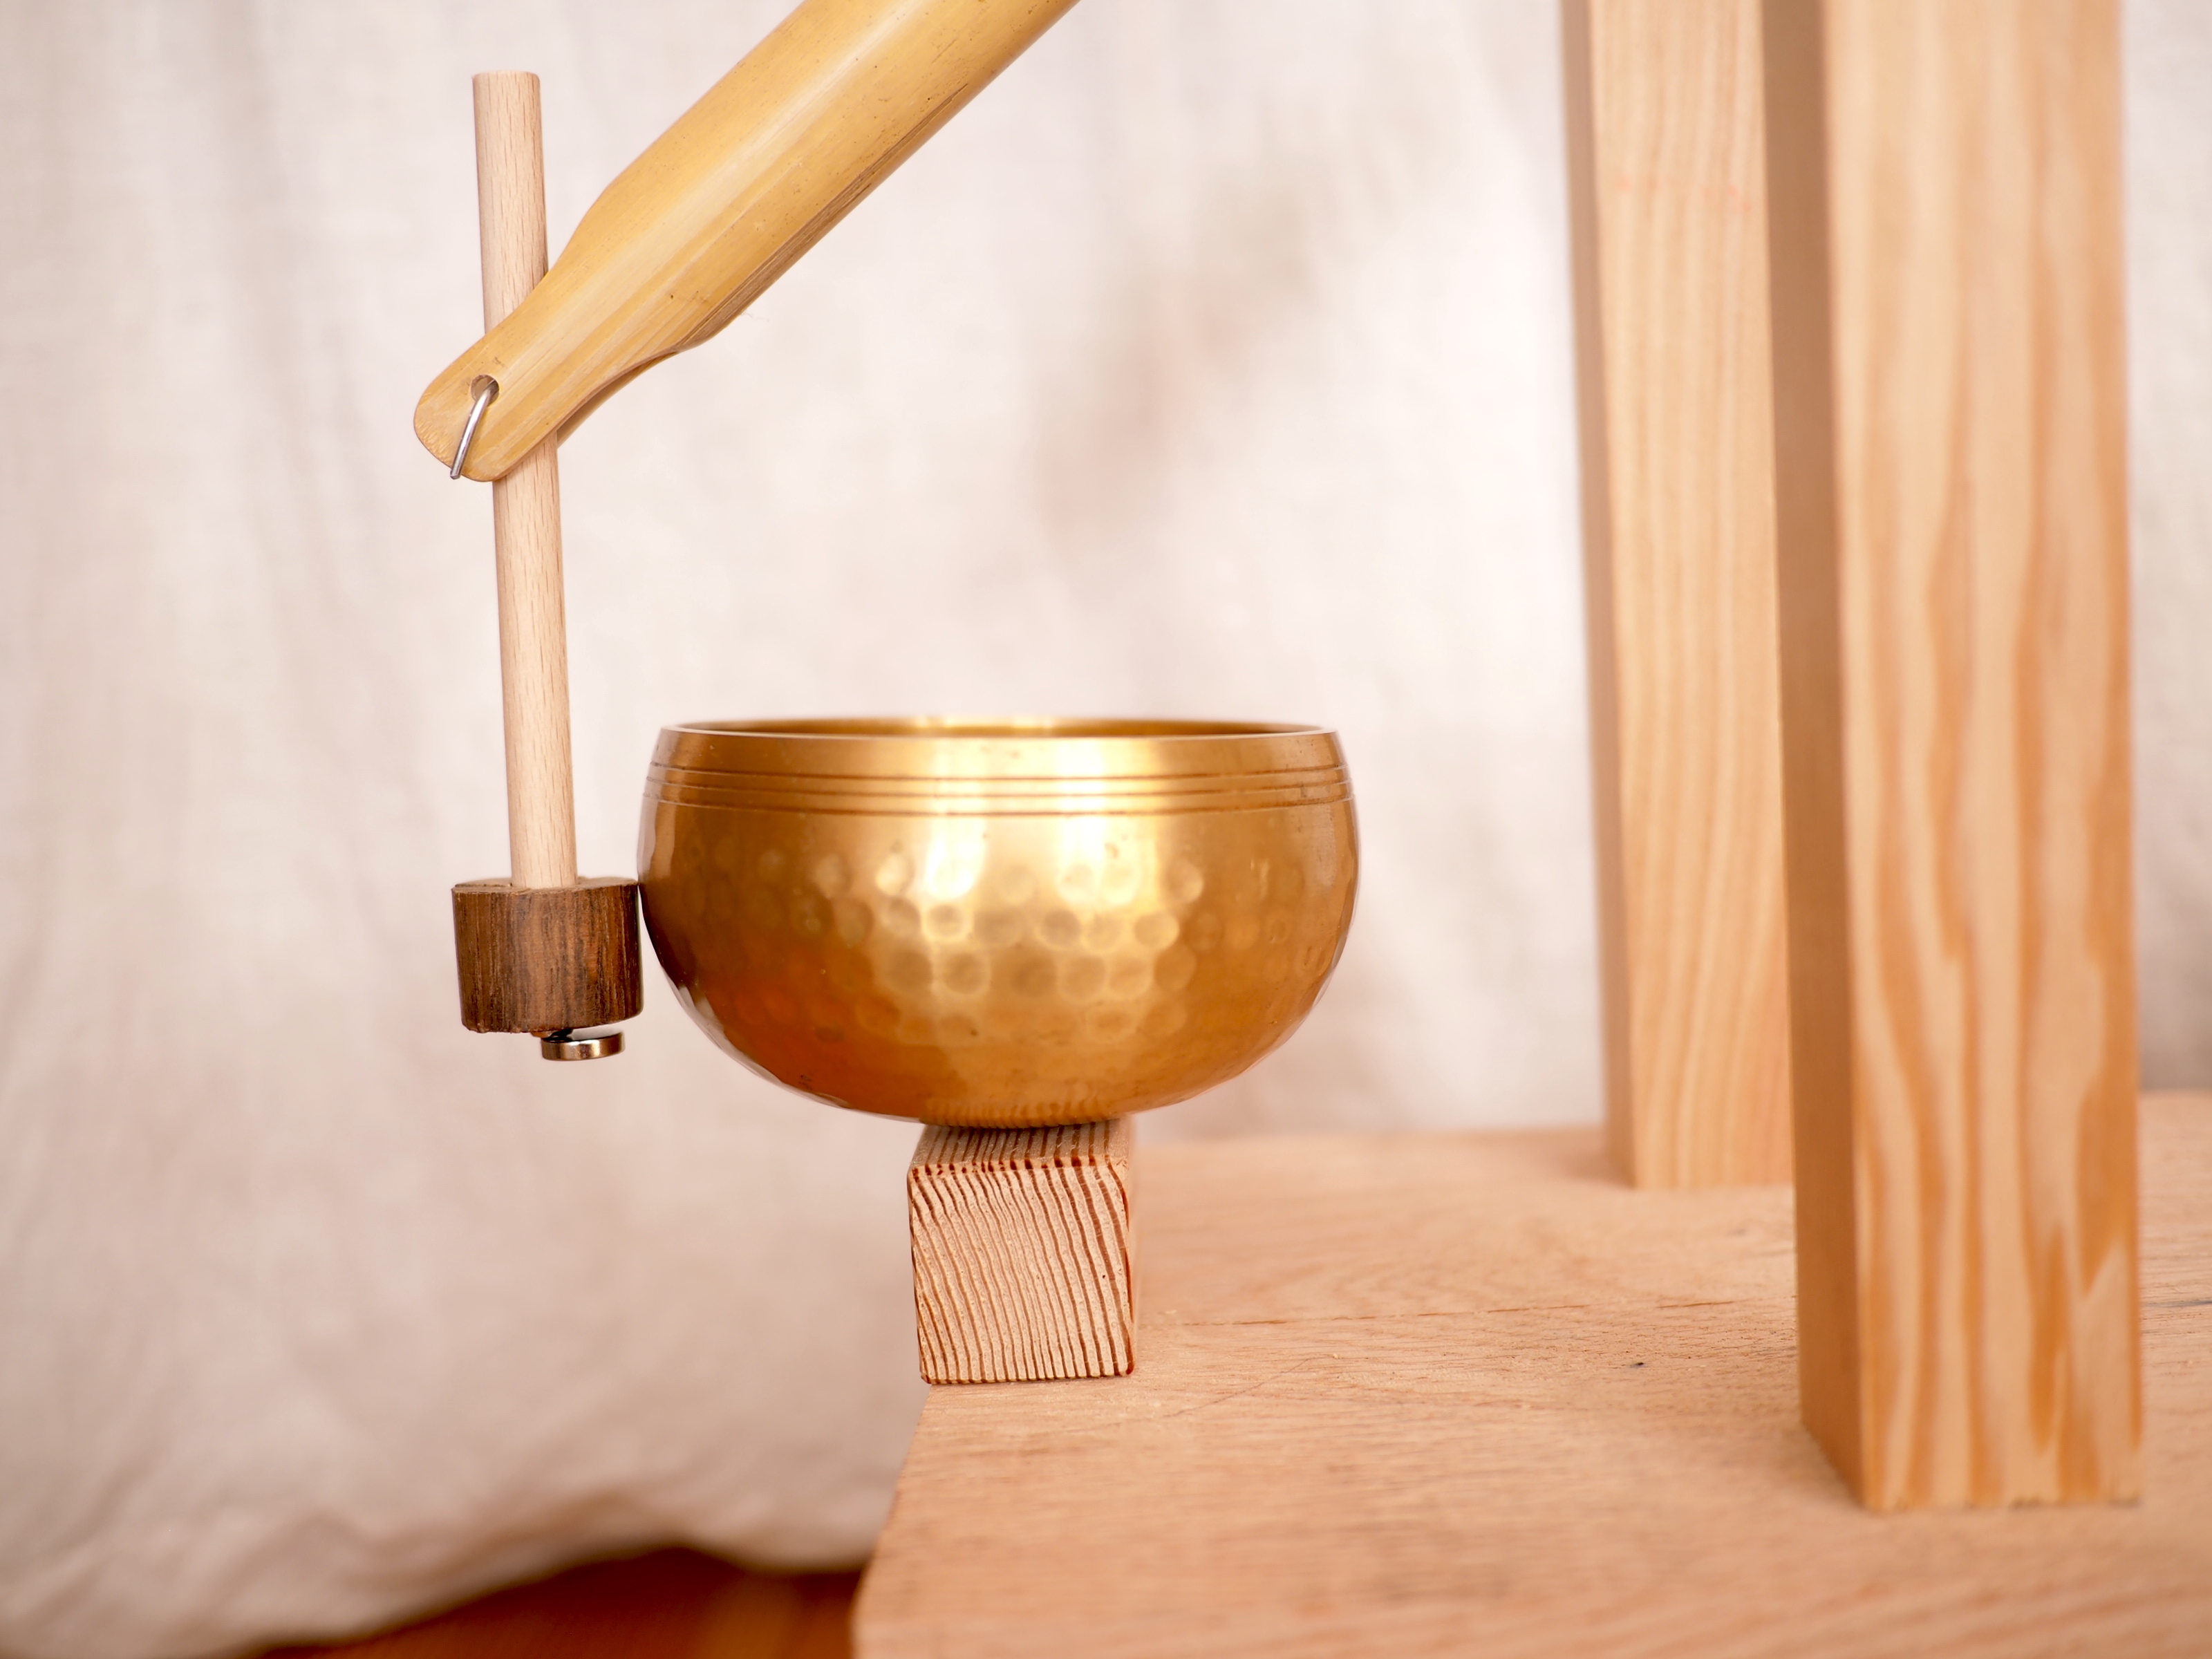 A closeup of the singing bowl and a hanging wooden mallet touching it.